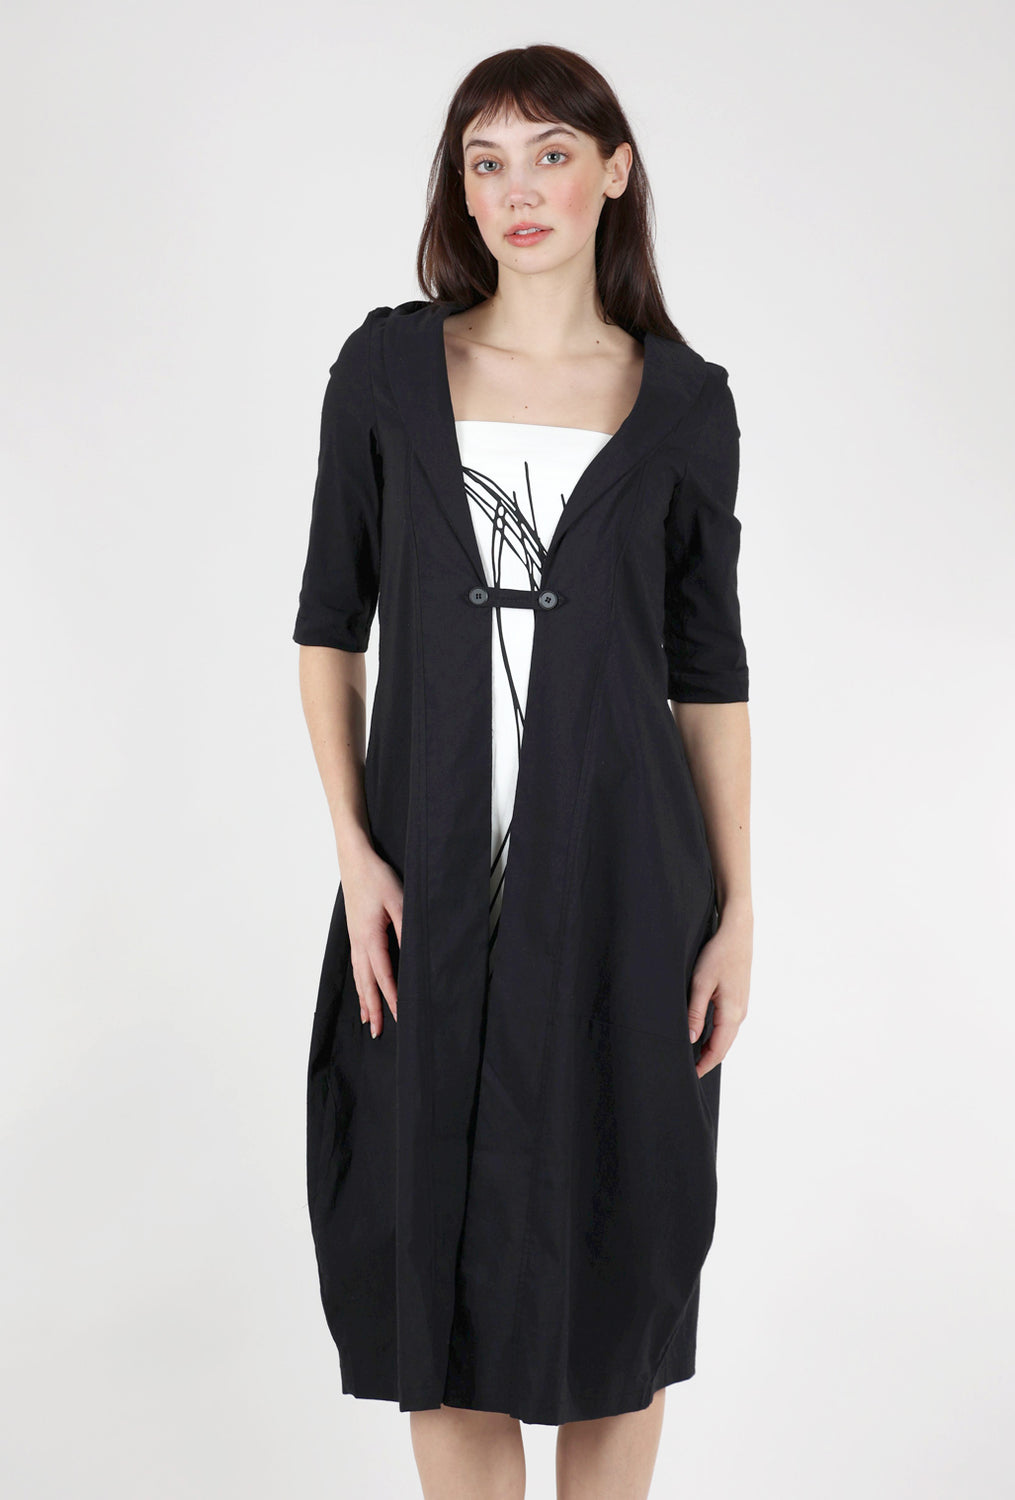 Luukaa Contrast Inset Structured Dress, Black/White 